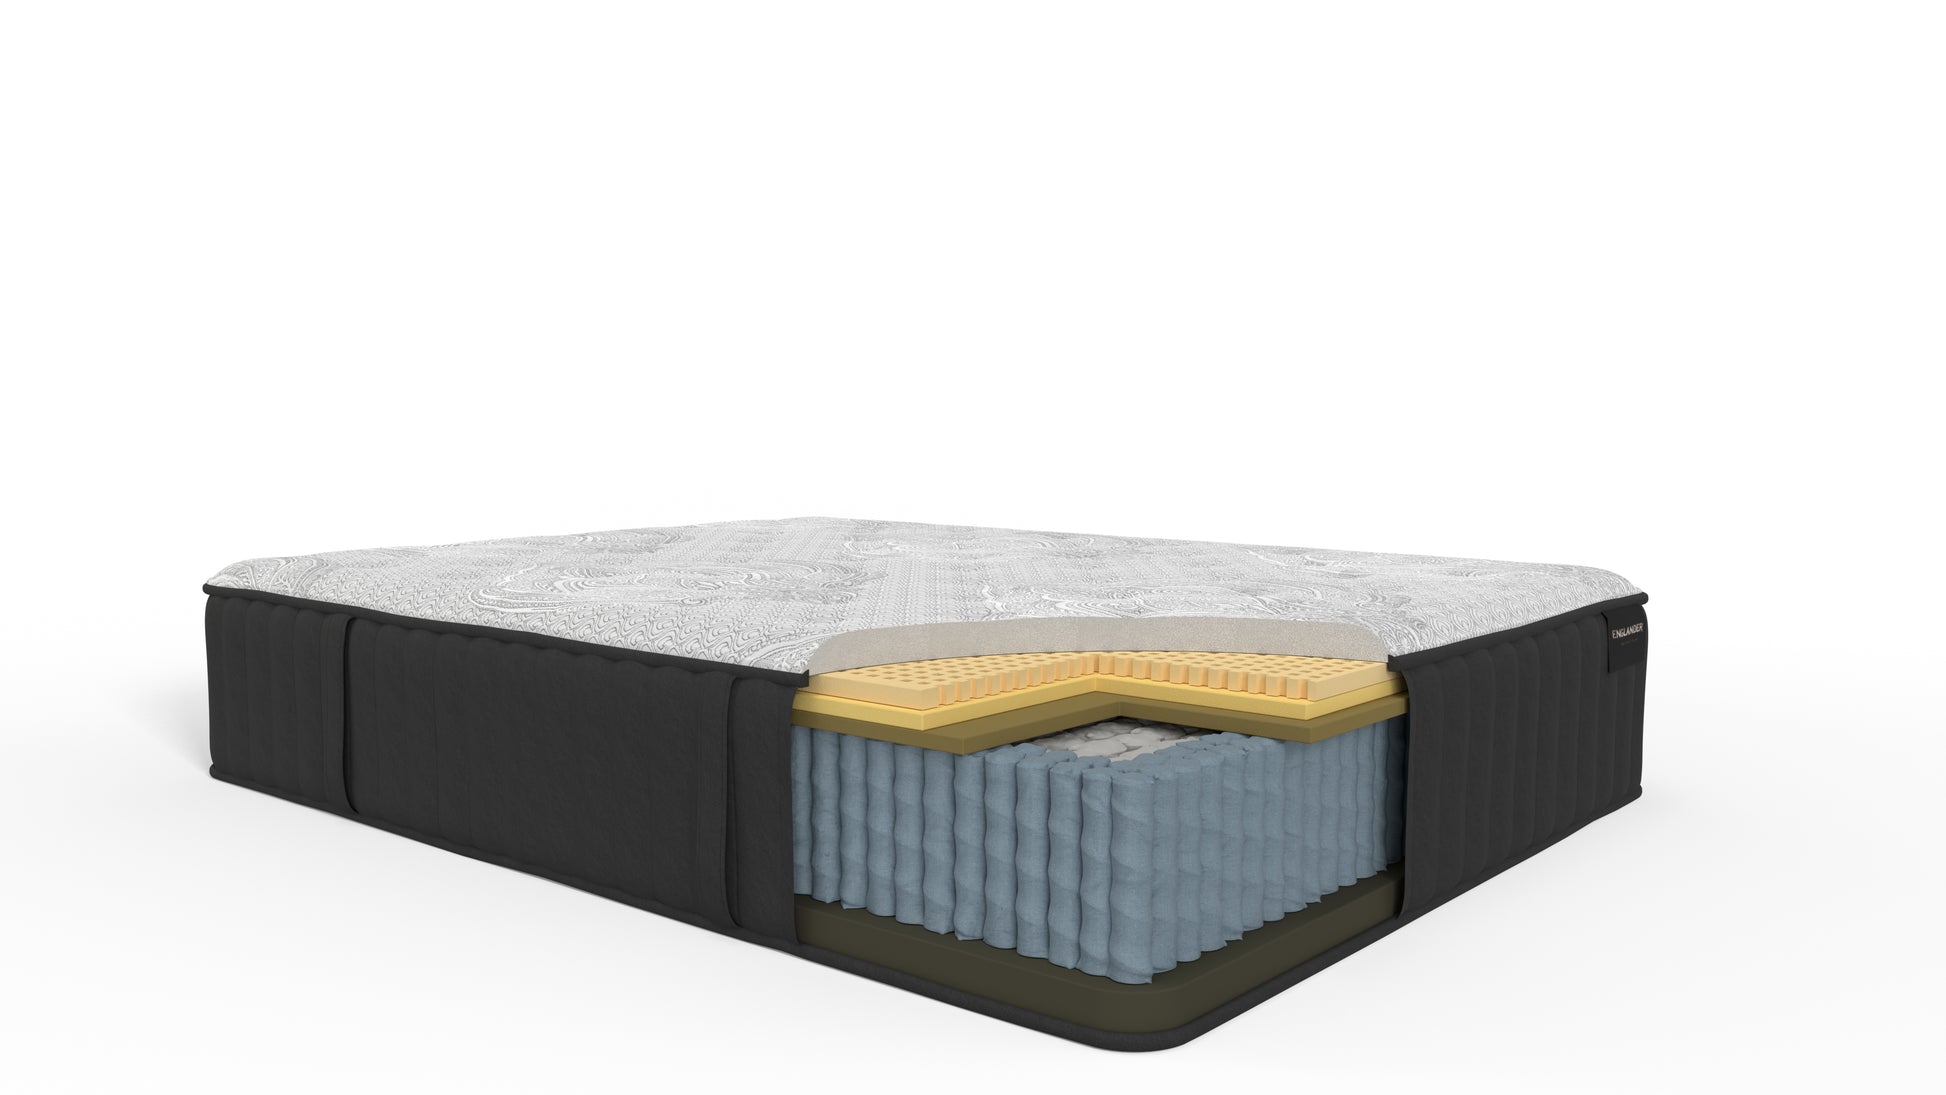 Beckford Tight Top Mattress by Englander Image of the Materials used inside the Mattress